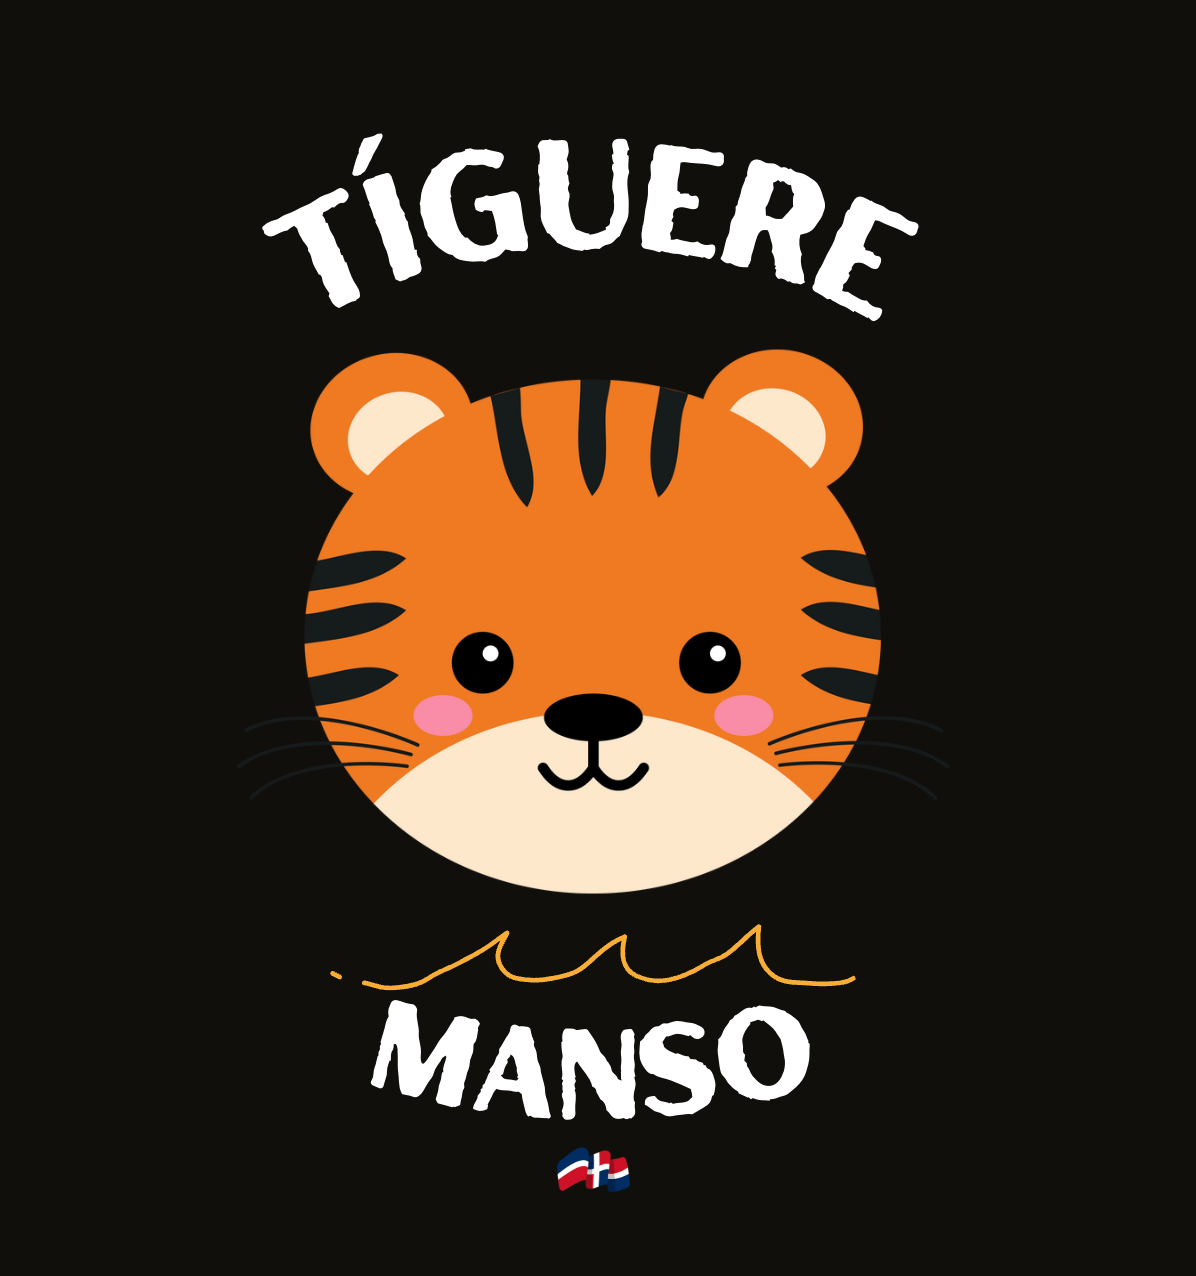 🇩🇴 Tiguere Manso (Juventud)